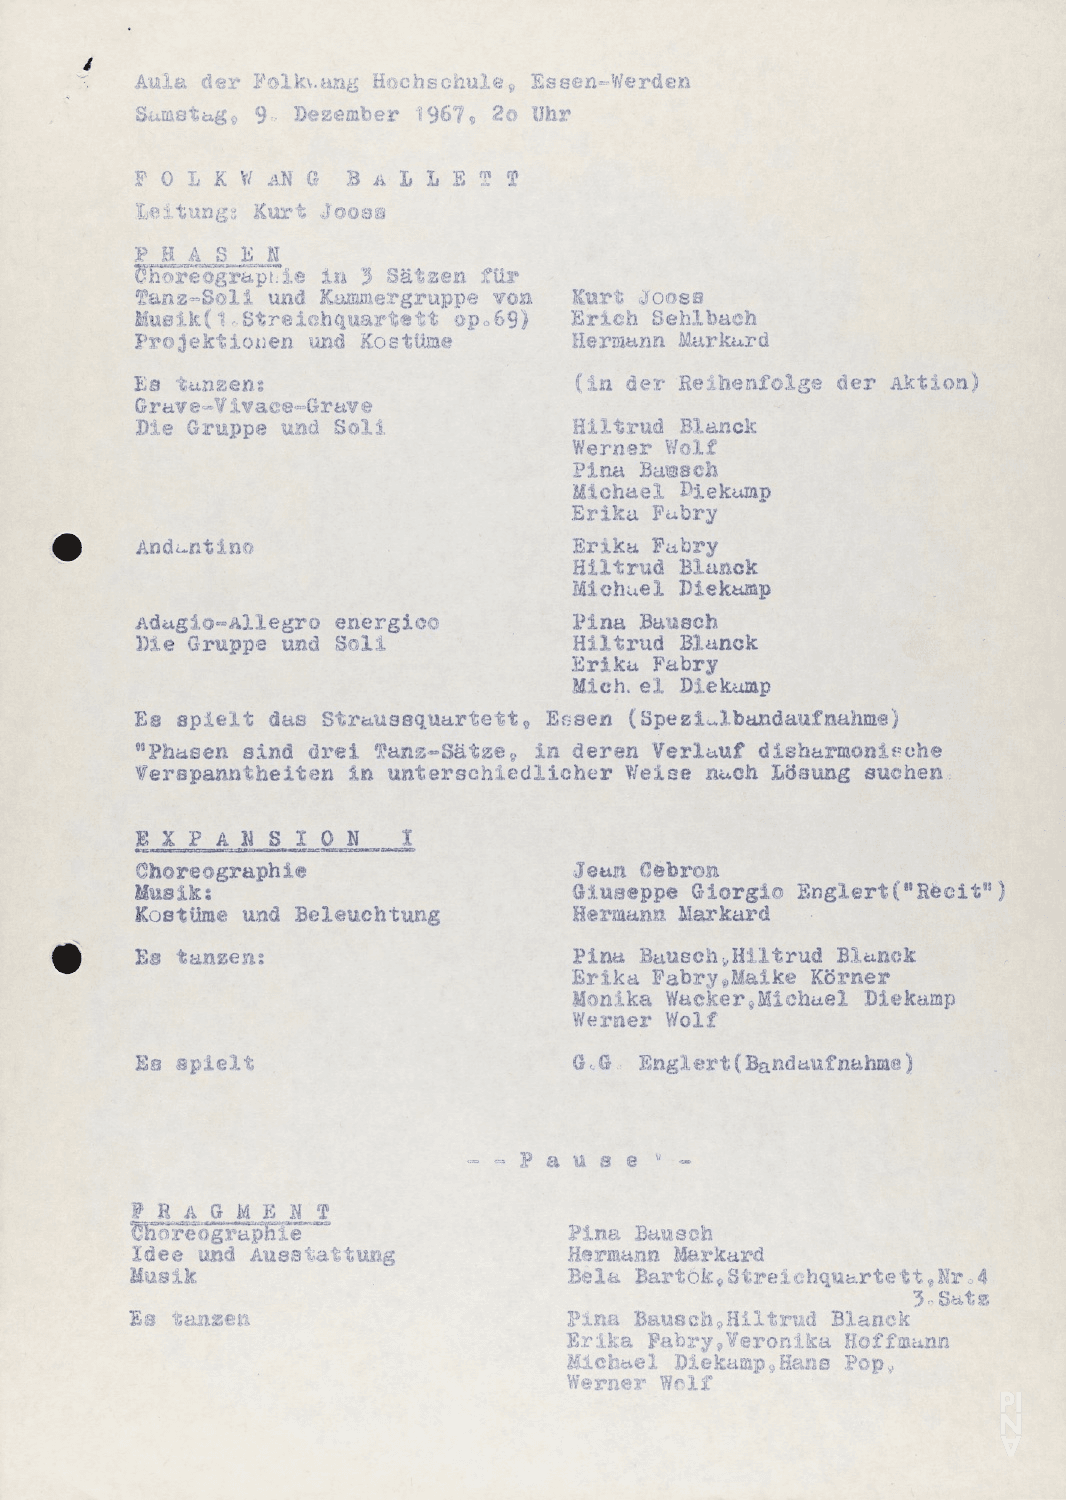 Evening leaflet for “Fragment” by Pina Bausch with Folkwangballett in in Essen, Dec. 9, 1967